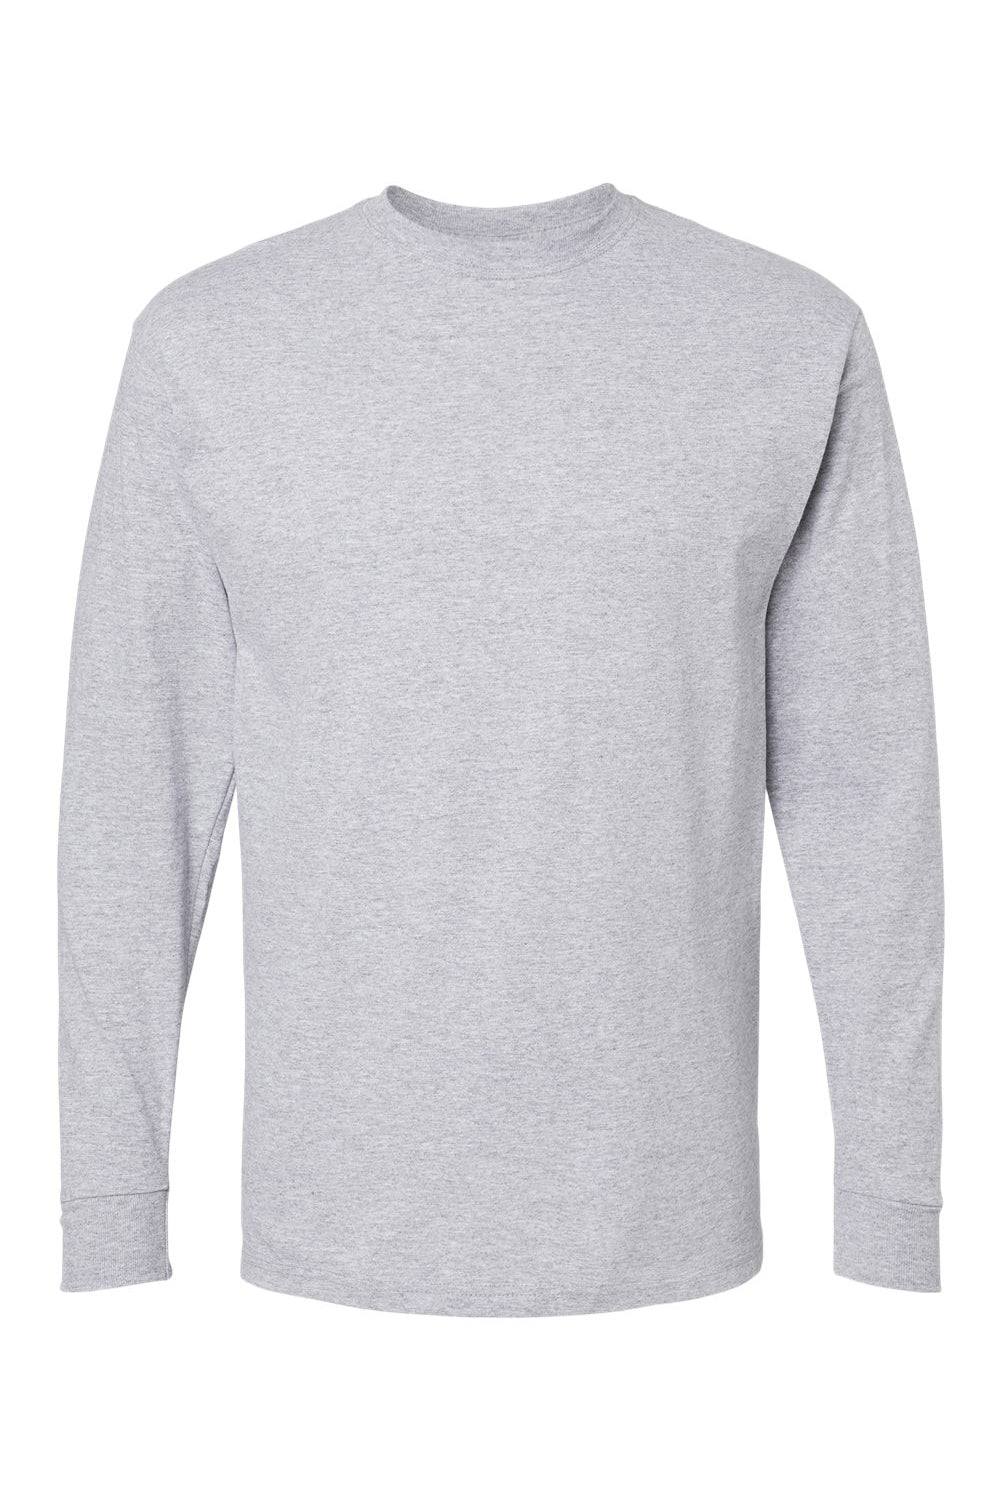 M&O 4820 Mens Gold Soft Touch Long Sleeve Crewneck T-Shirt Athletic Grey Flat Front